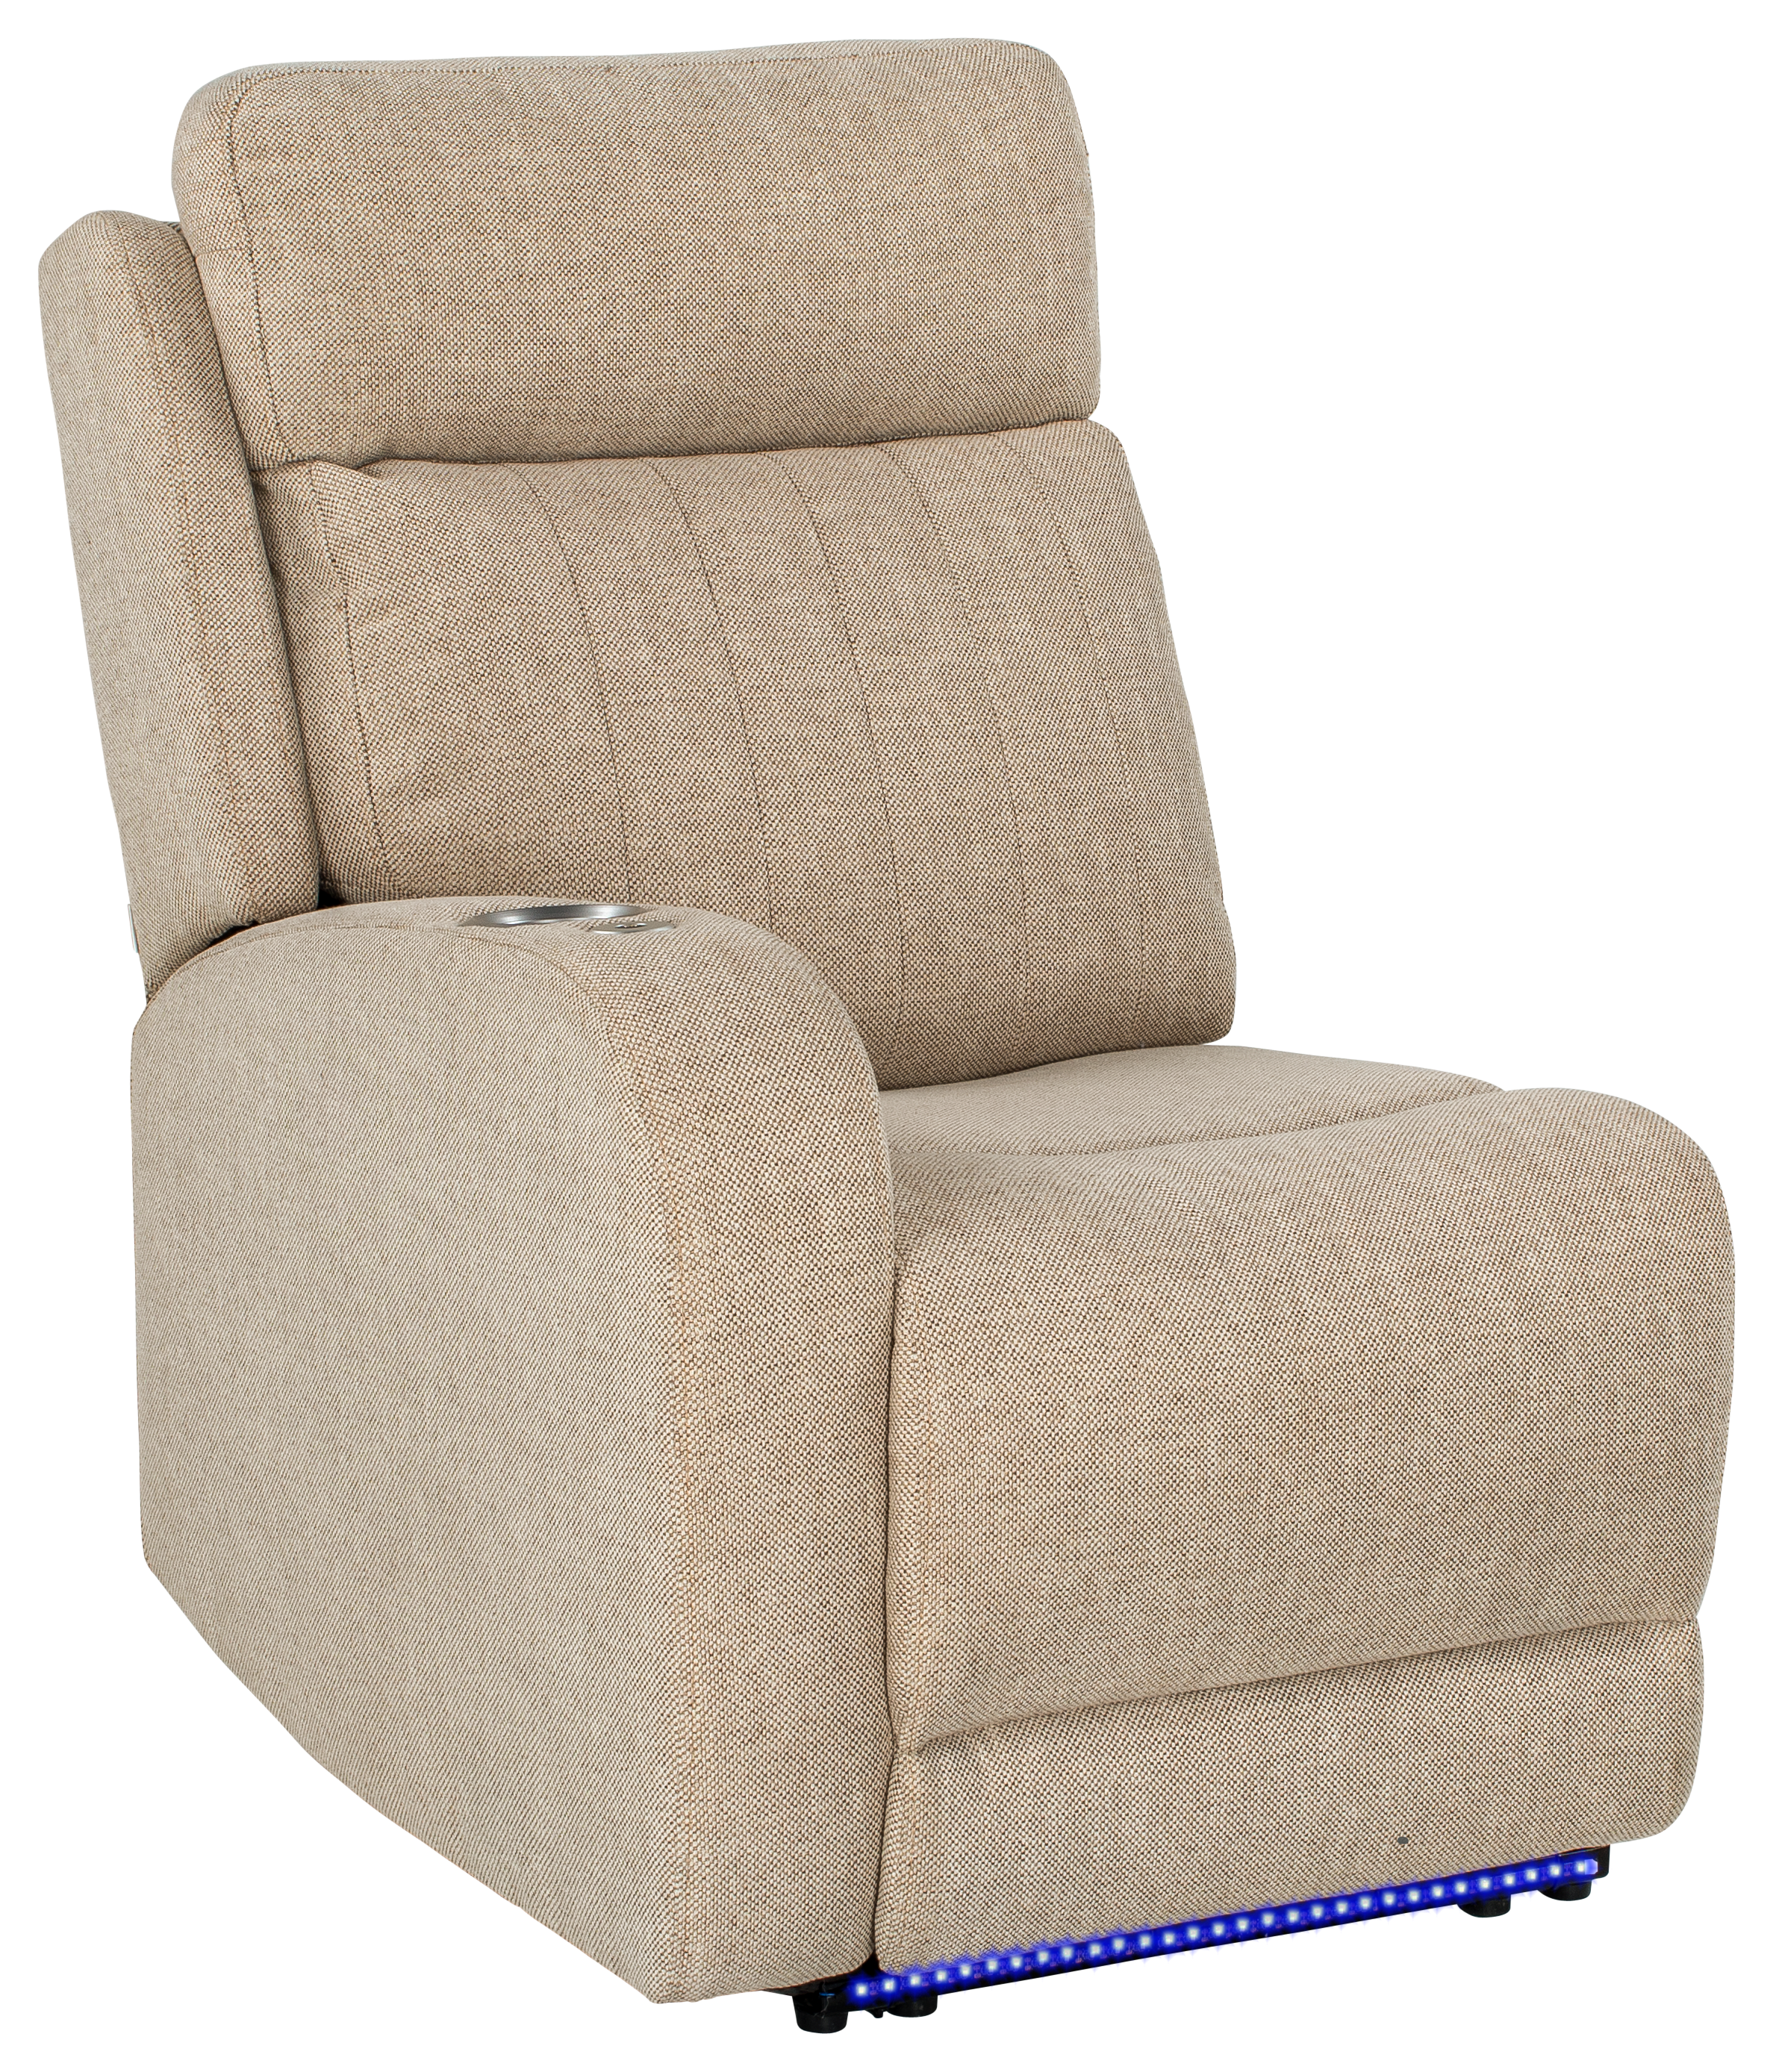 Thomas Payne Norlina RV Furniture Collection Seismic Single-Arm Recliners